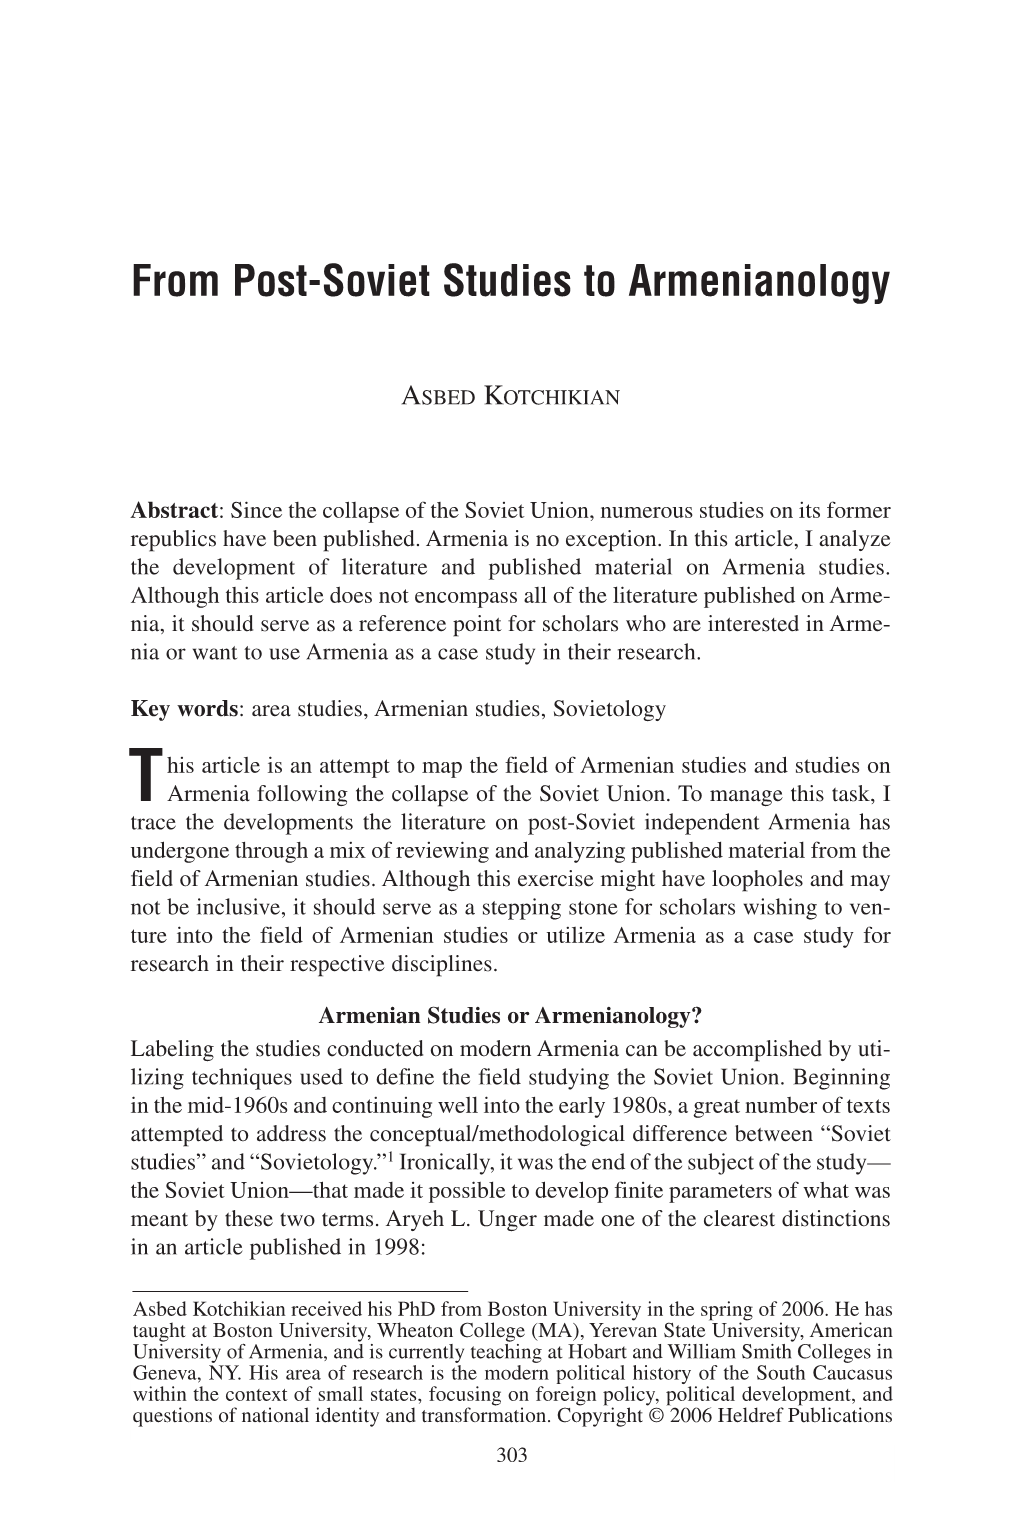 From Post-Soviet Studies to Armenianology